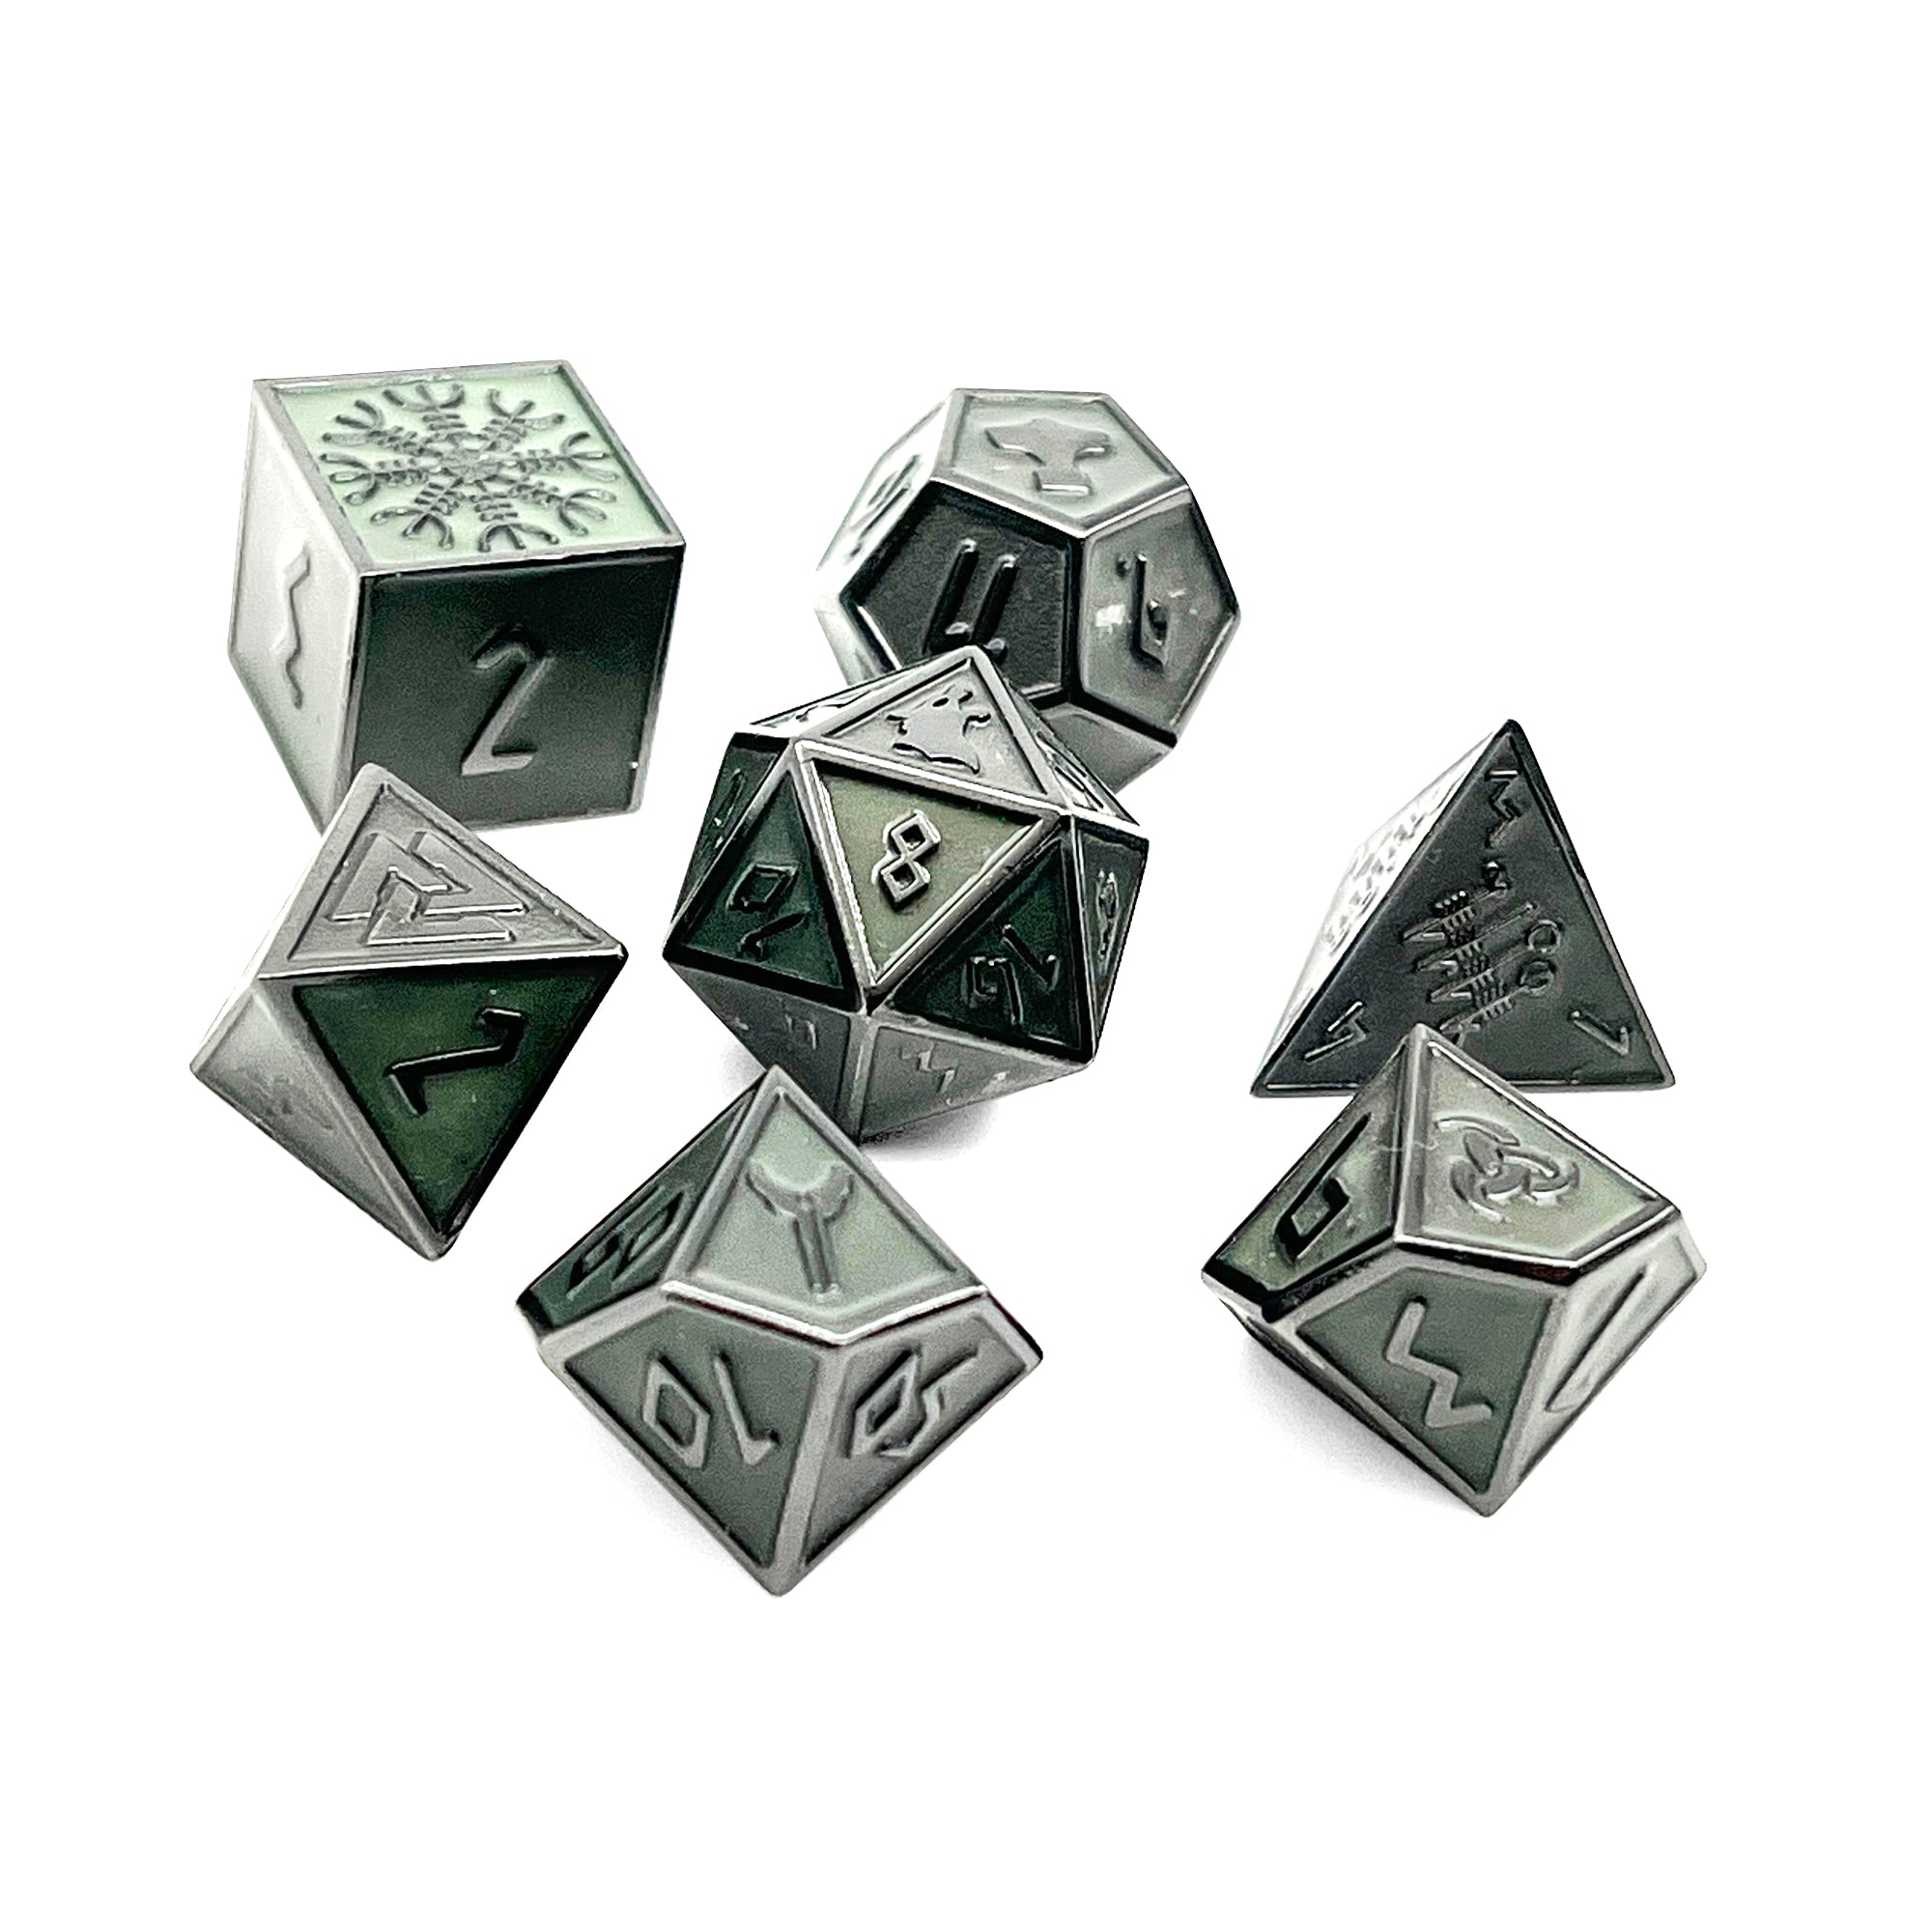 Green Slime Norse Themed Metal Dice Set